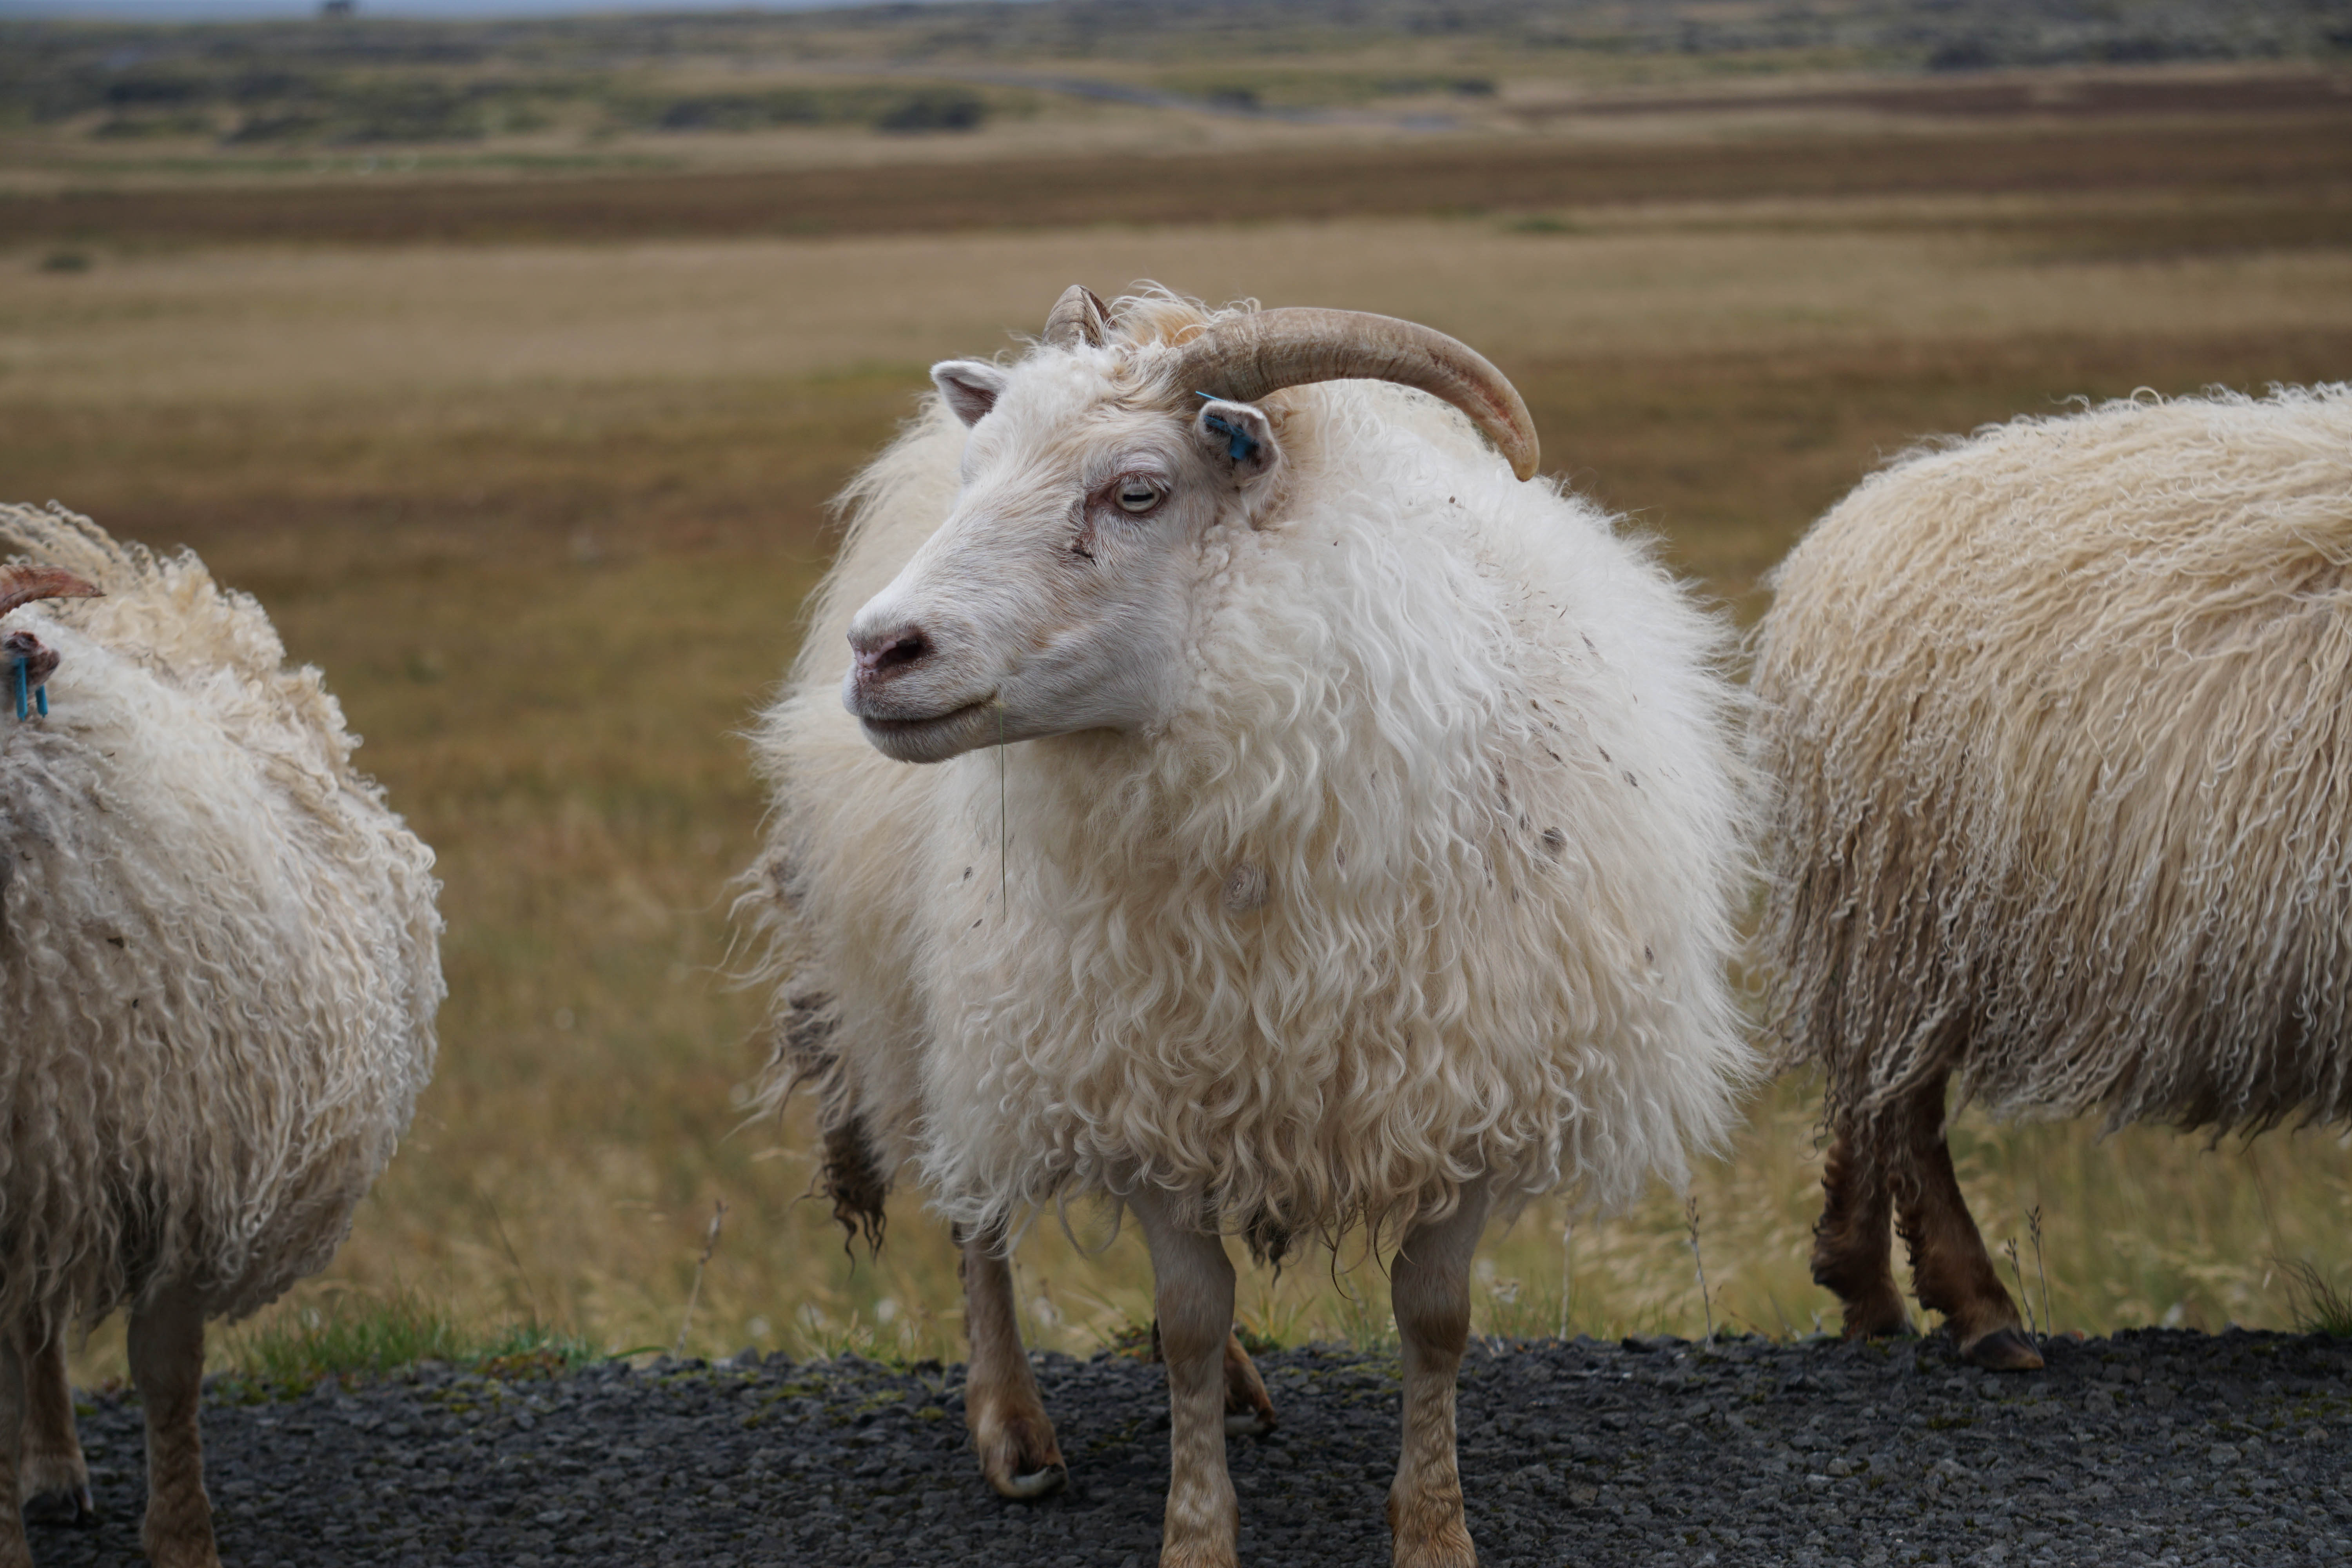 In Iceland, sheep outnumber humans! Whatch out for sheep when driving in Iceland // 8 Rules for an Epic Iceland Road Trip